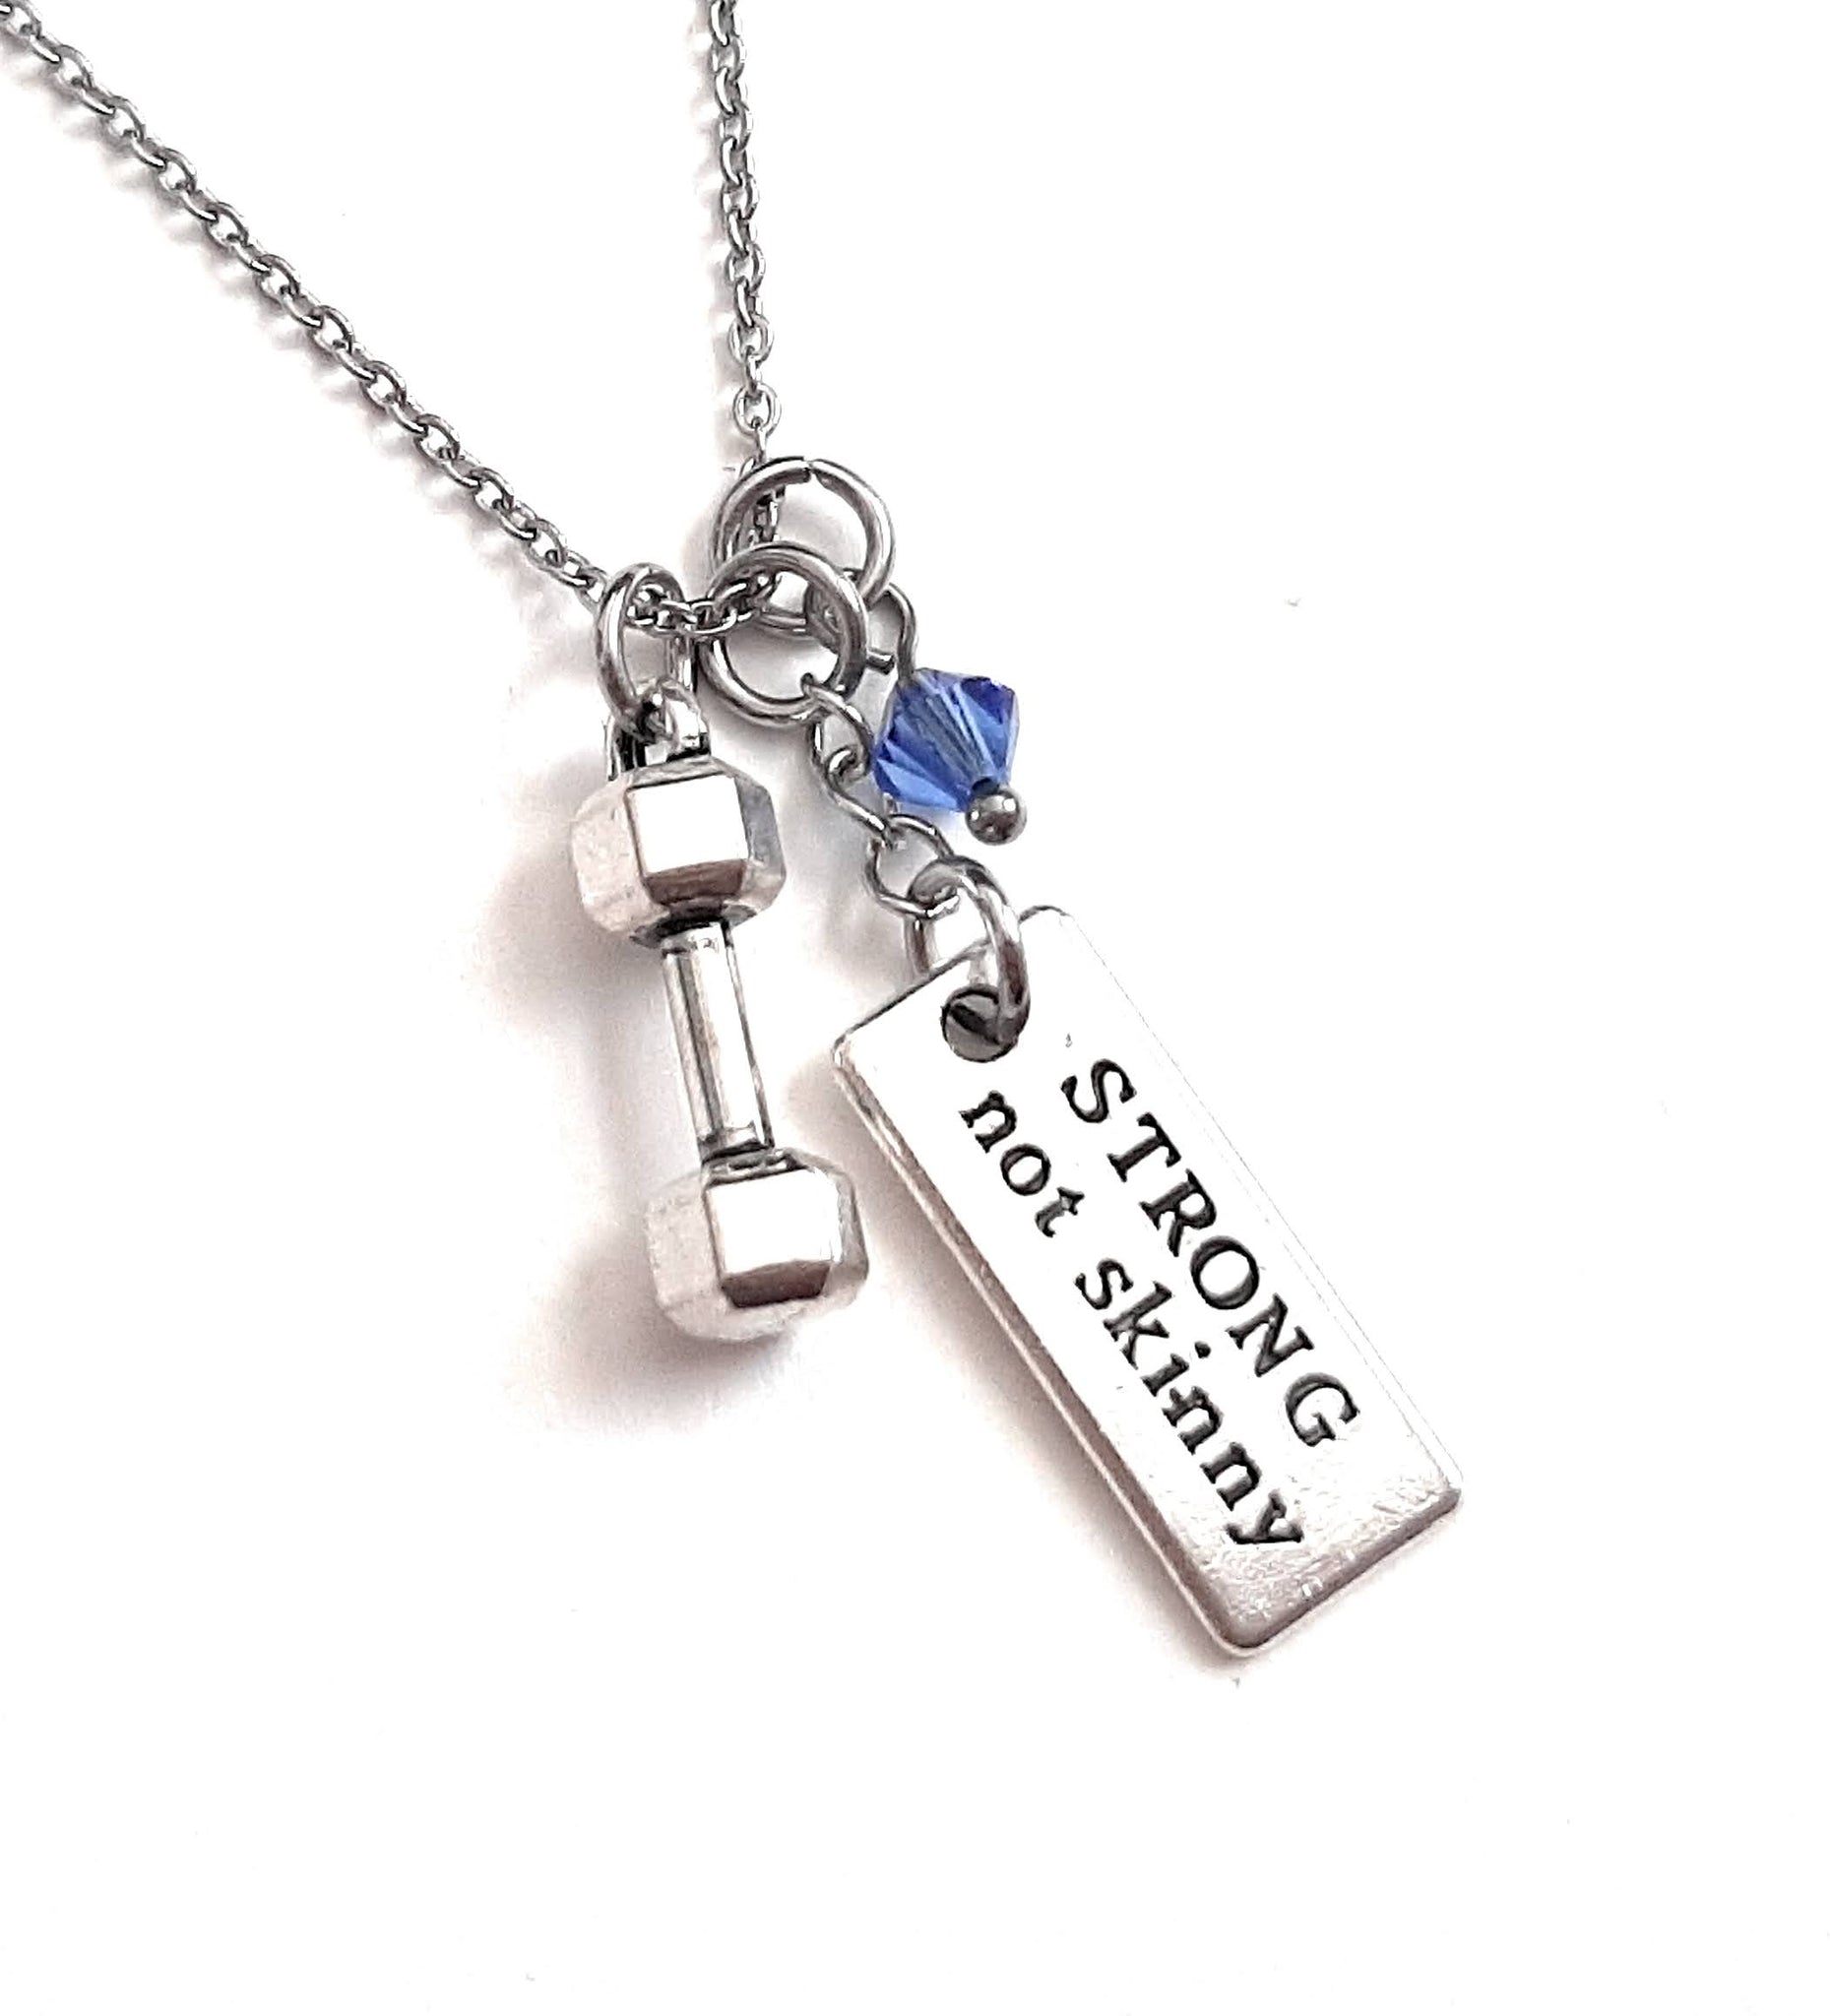 Message Pendant Necklace "Strong not Skinny" Your Choice of Charm and Birthstone Color